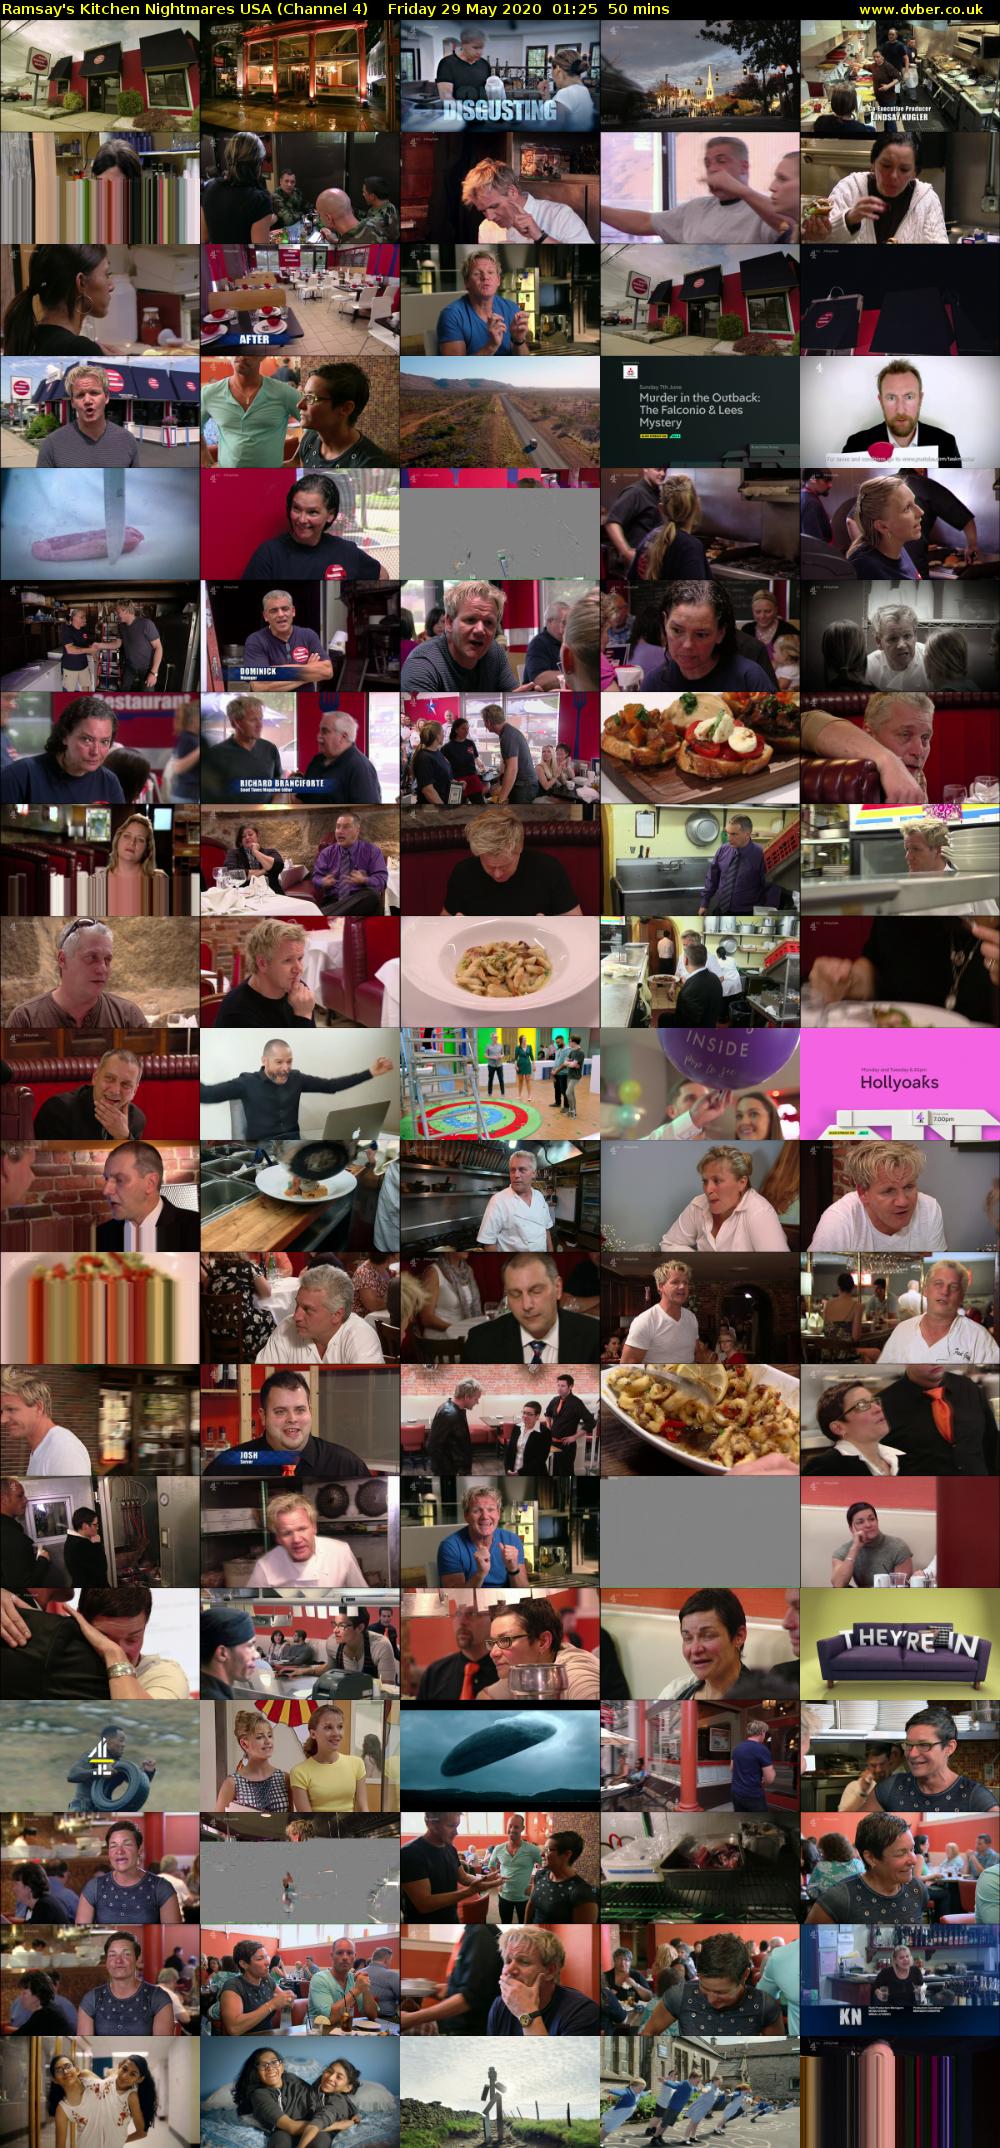 Ramsay's Kitchen Nightmares USA (Channel 4) Friday 29 May 2020 01:25 - 02:15